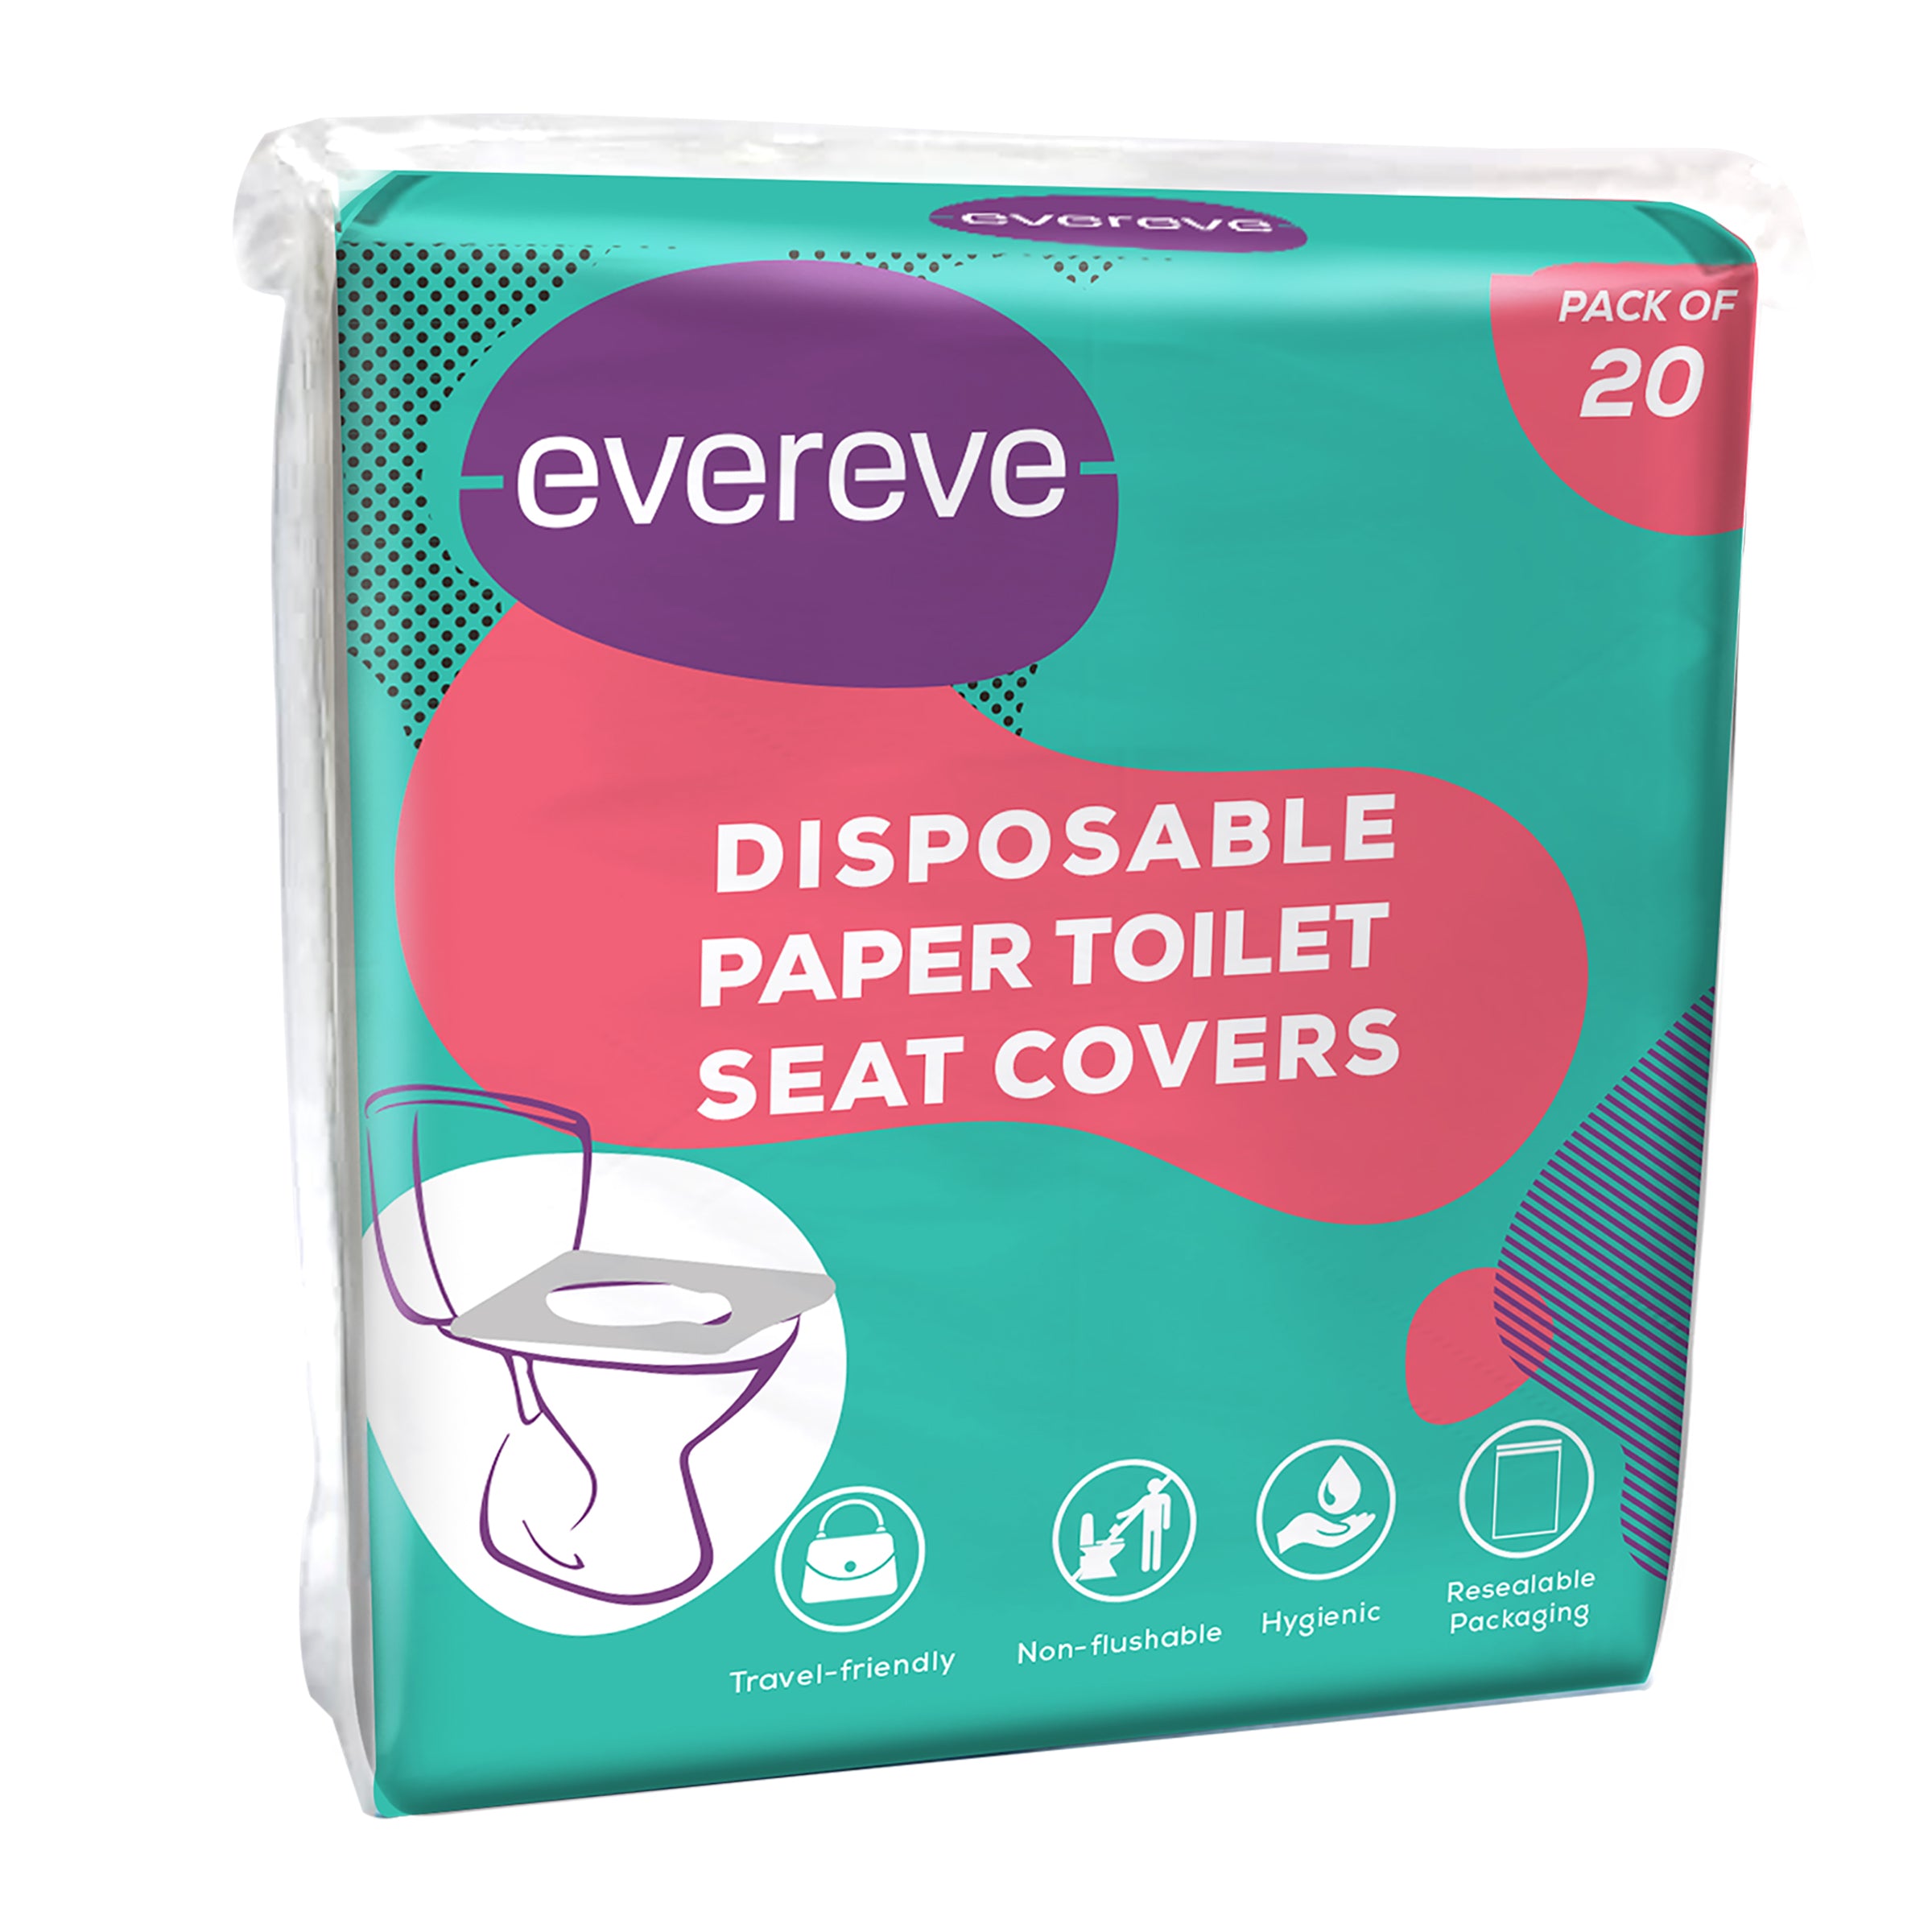 EverEve Ultra Absorbent Disposable Period Panties, L-XL, 10's Pack